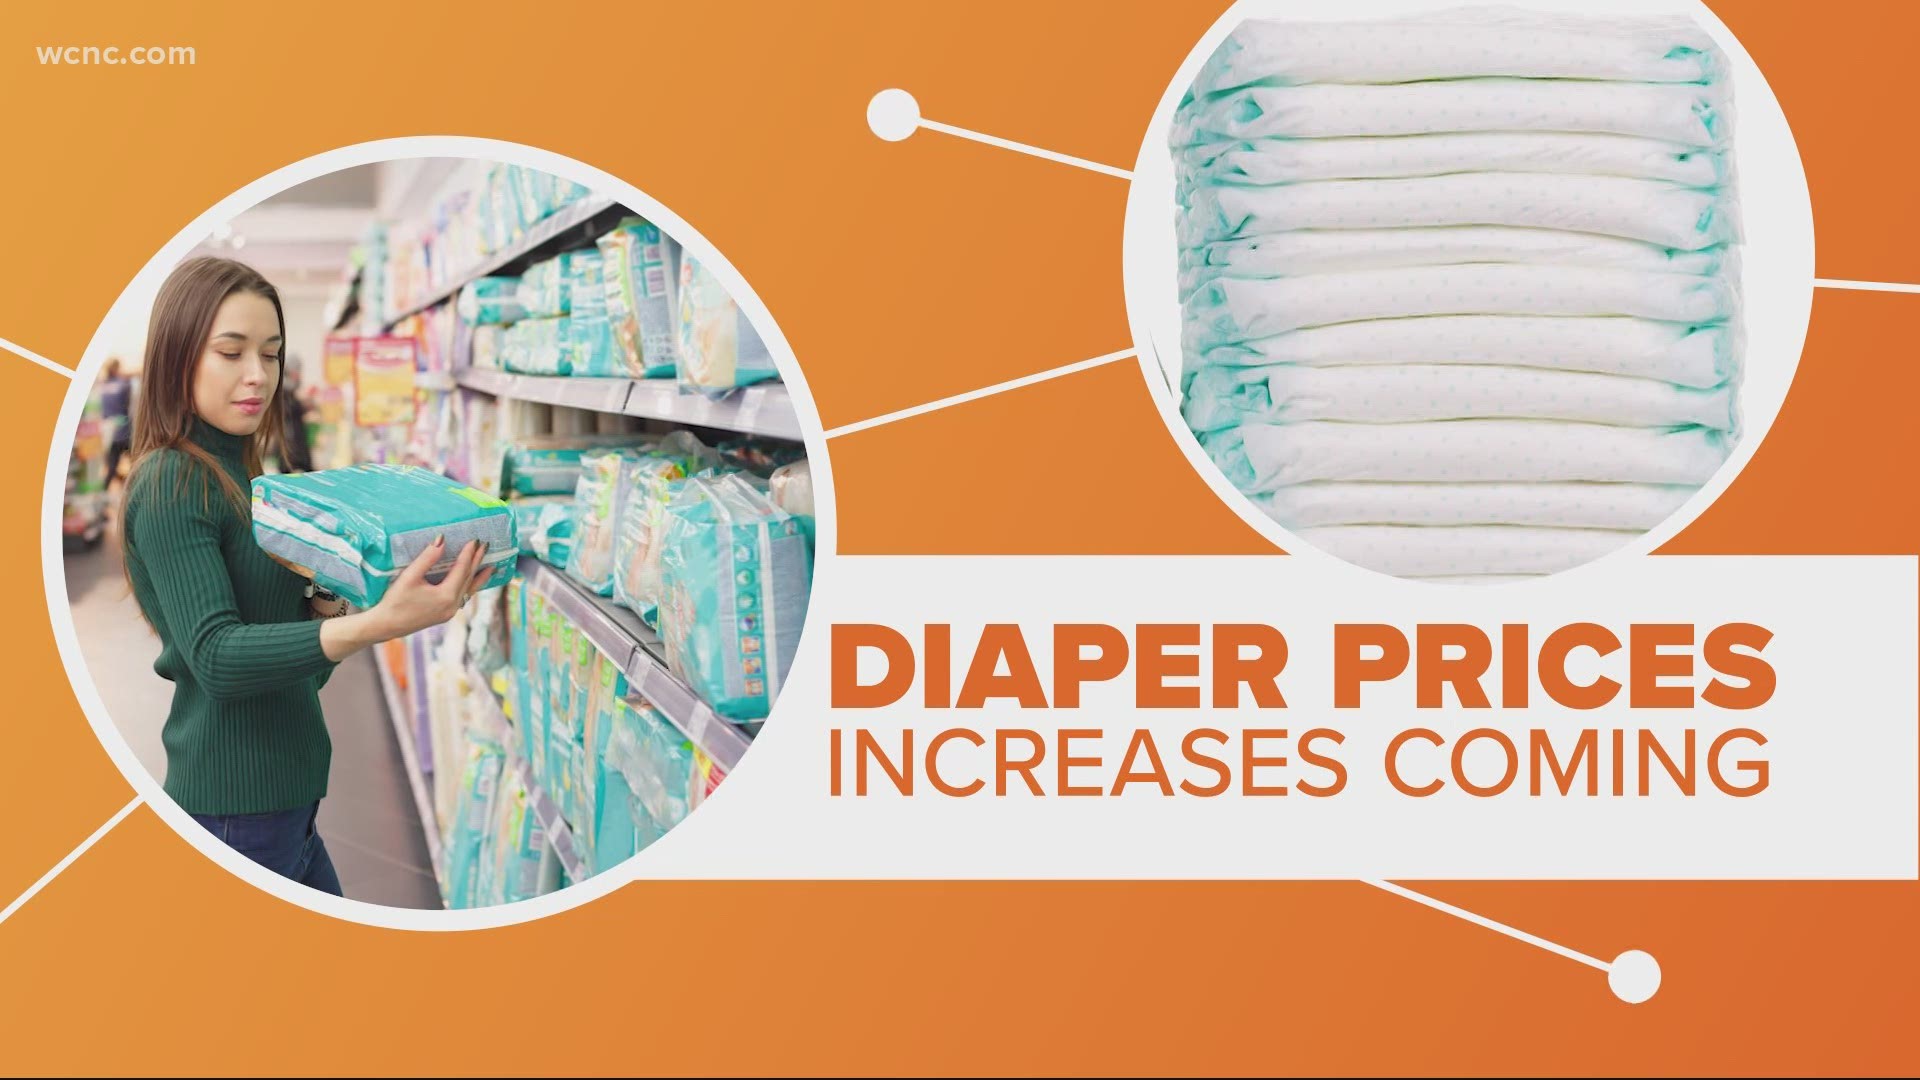 Parents are about to pay more for diapers. A lot more, actually. And the increase comes as many new parents struggle to afford the essentials for young children.